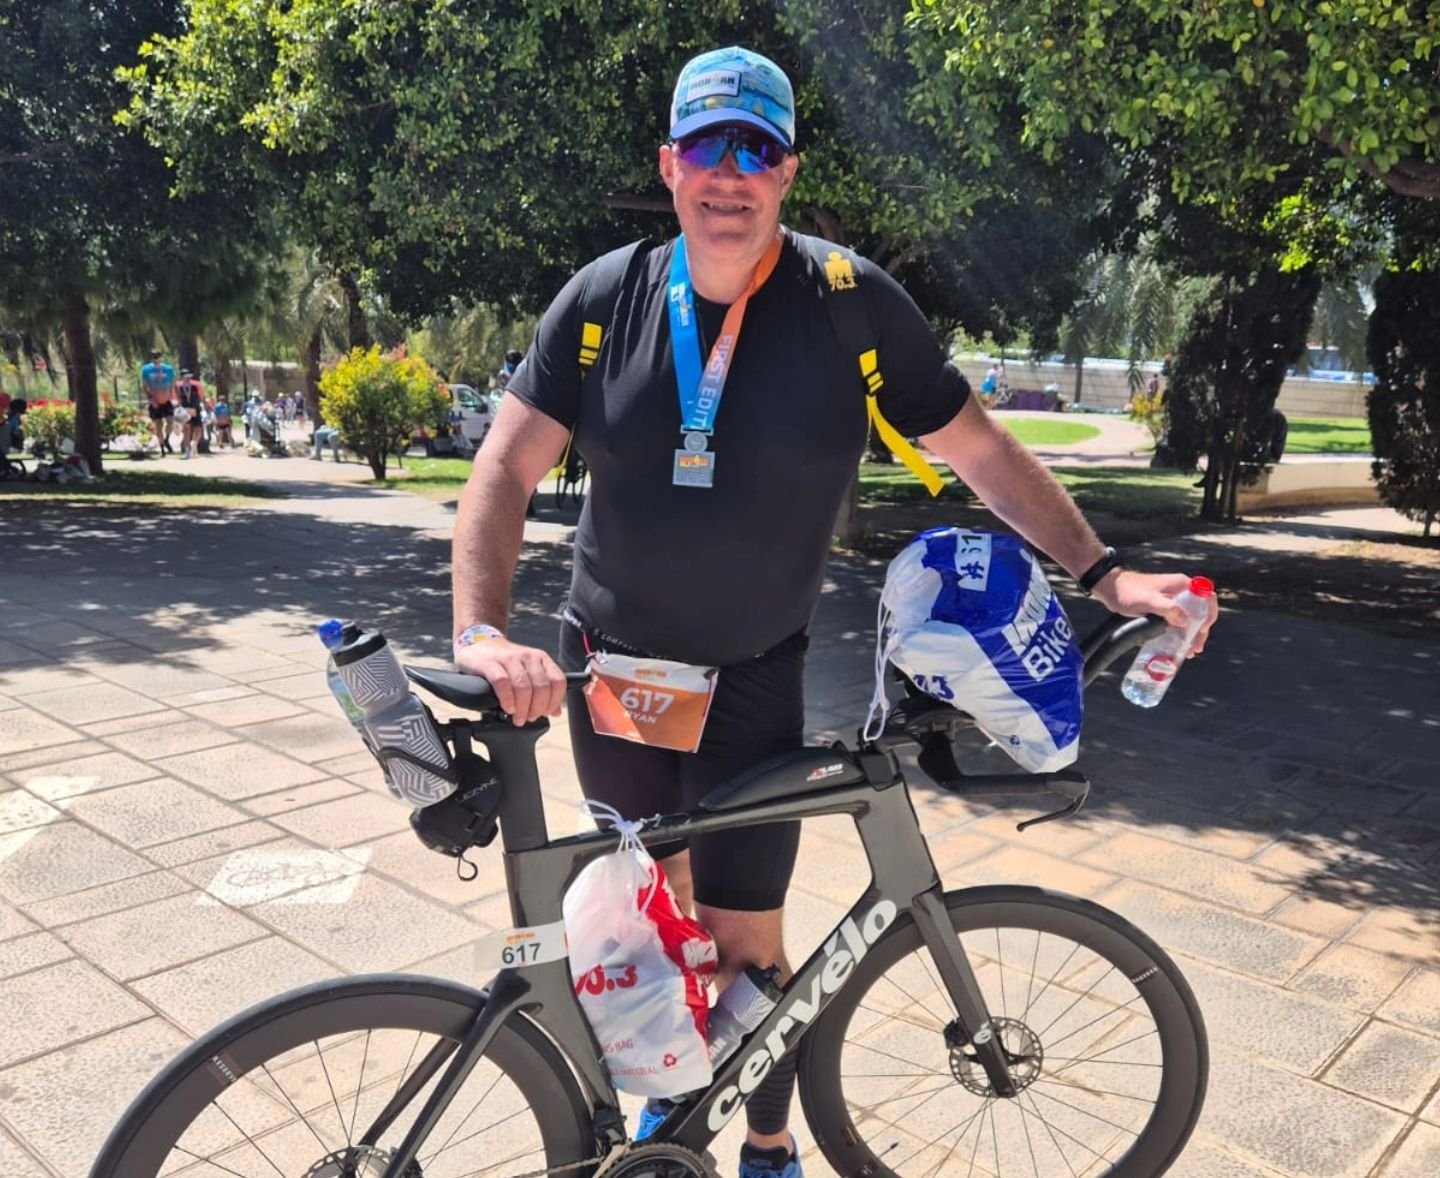 A huge congratulations for Bee 3 team member Ryan P. Perfect day for a 70.3 in Valencia 🌞 

Way to go 👏 🔥 

#valencia703 #triathlon #goteambee3 #racingishard #makeithappen